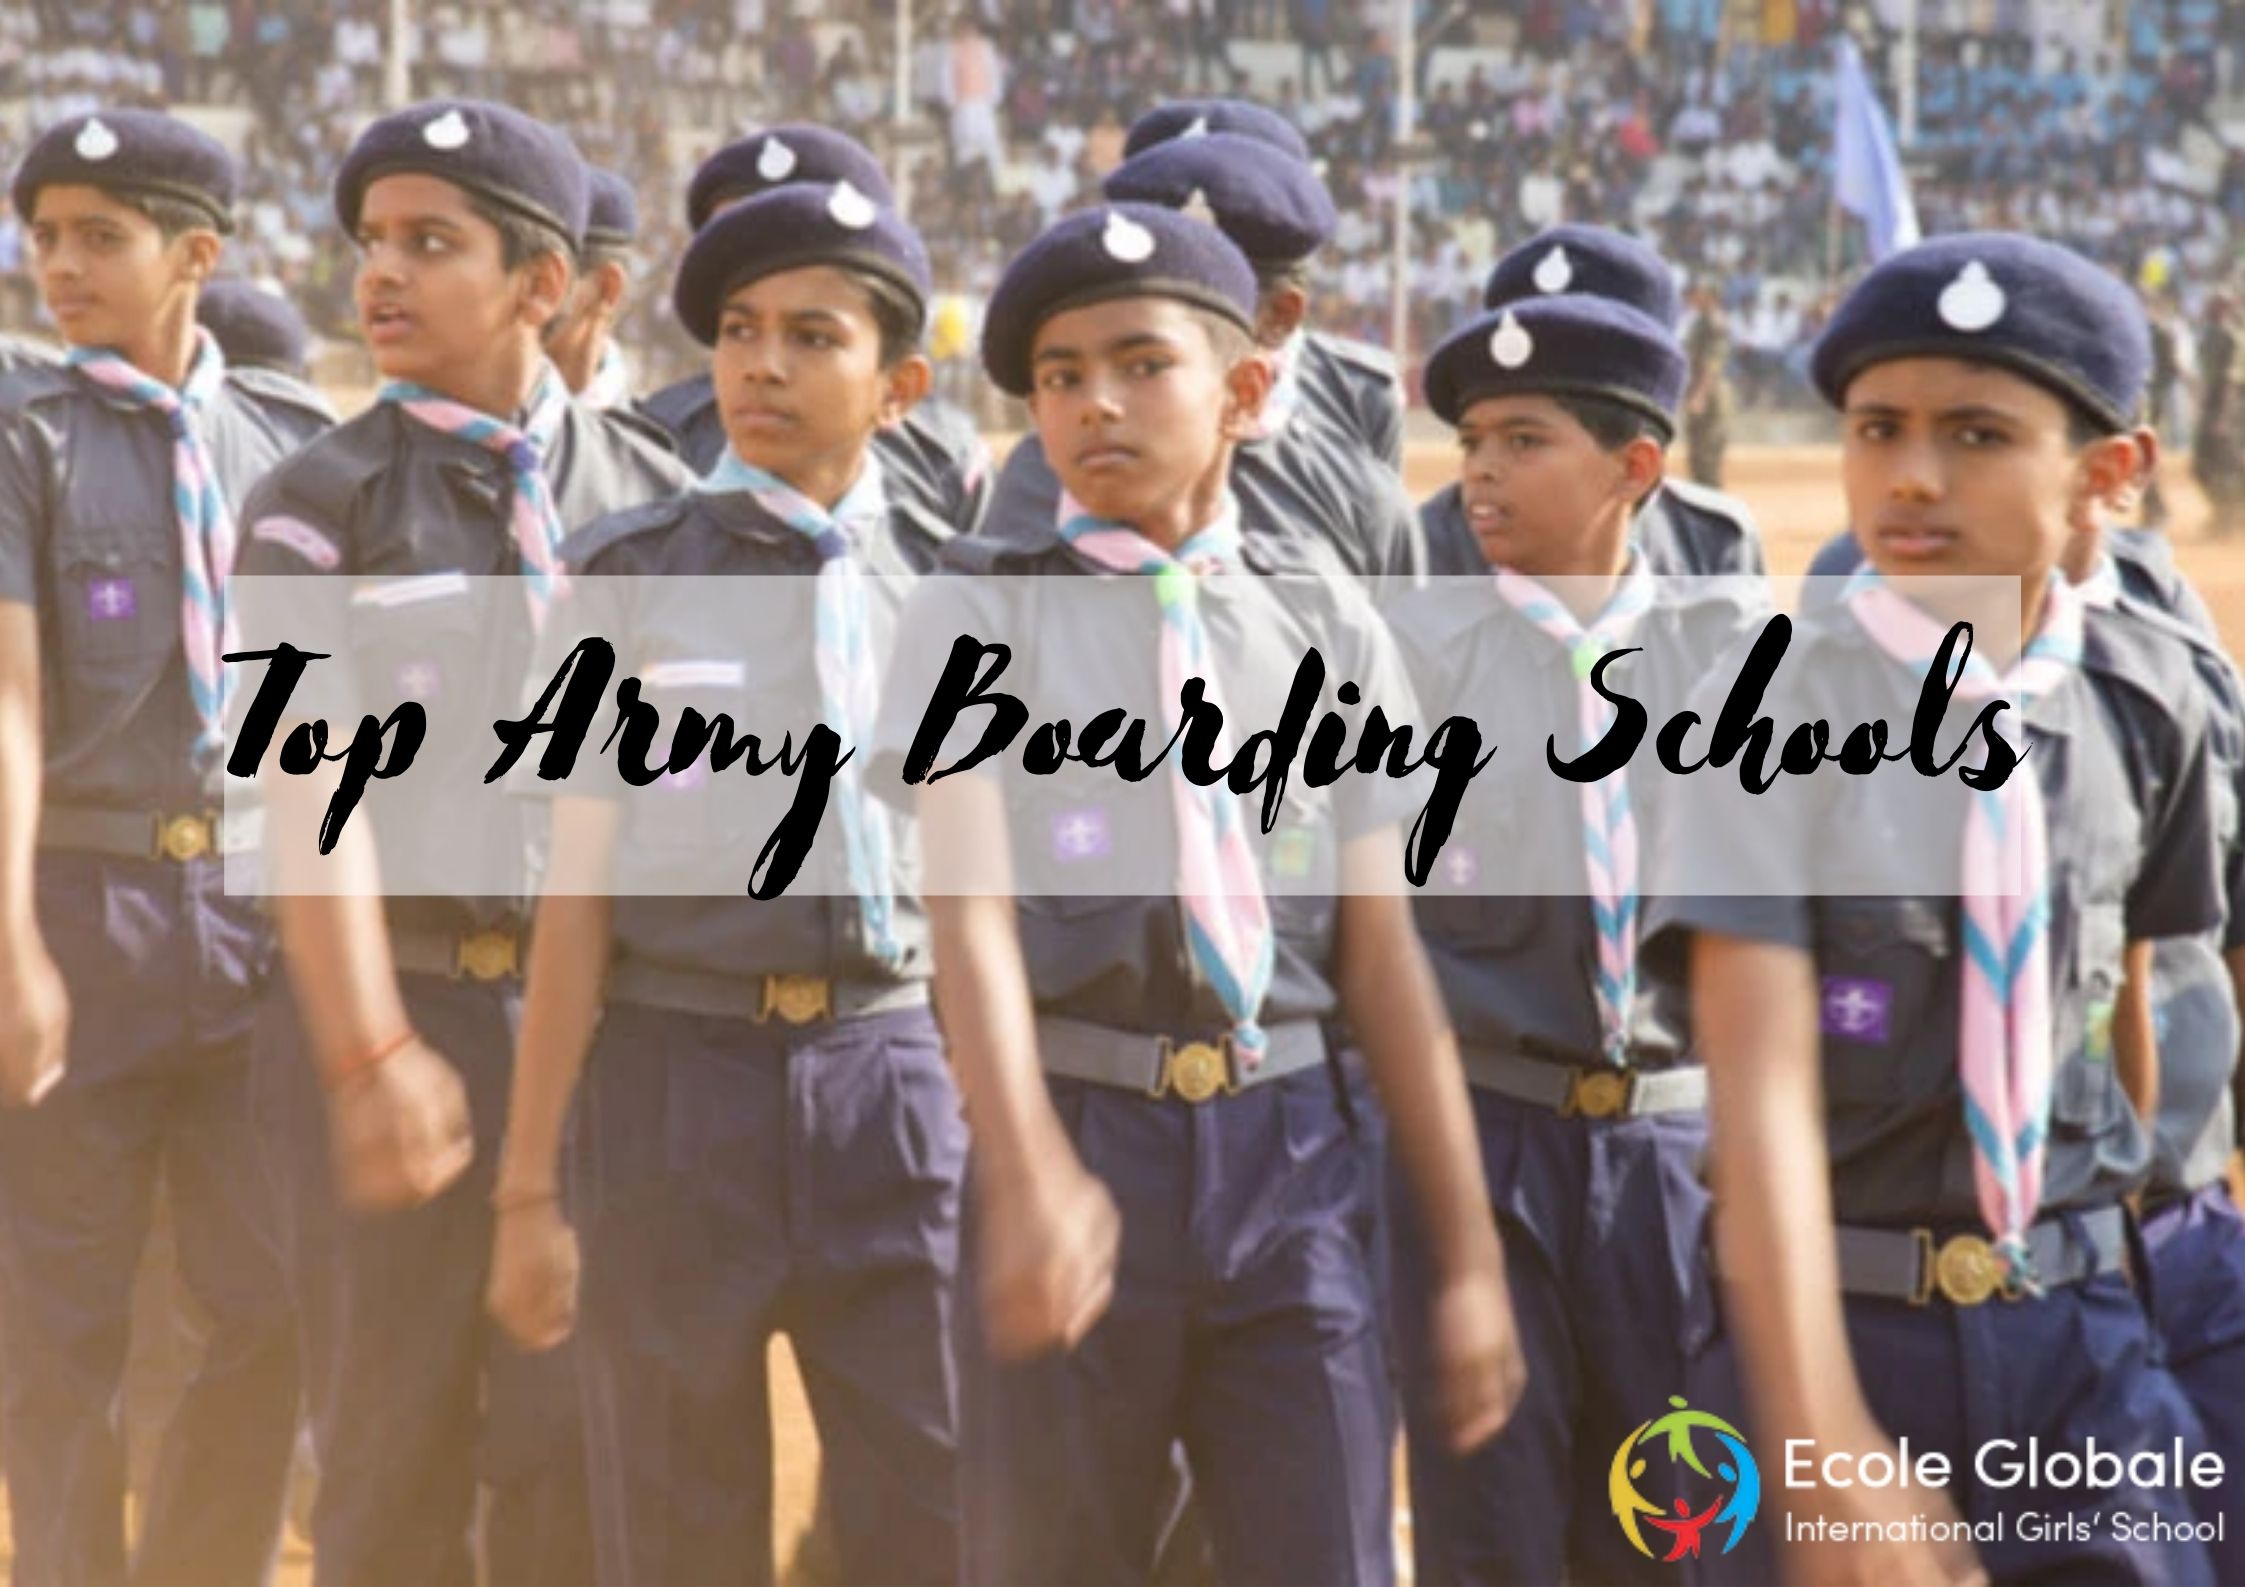 You are currently viewing Army boarding schools in India